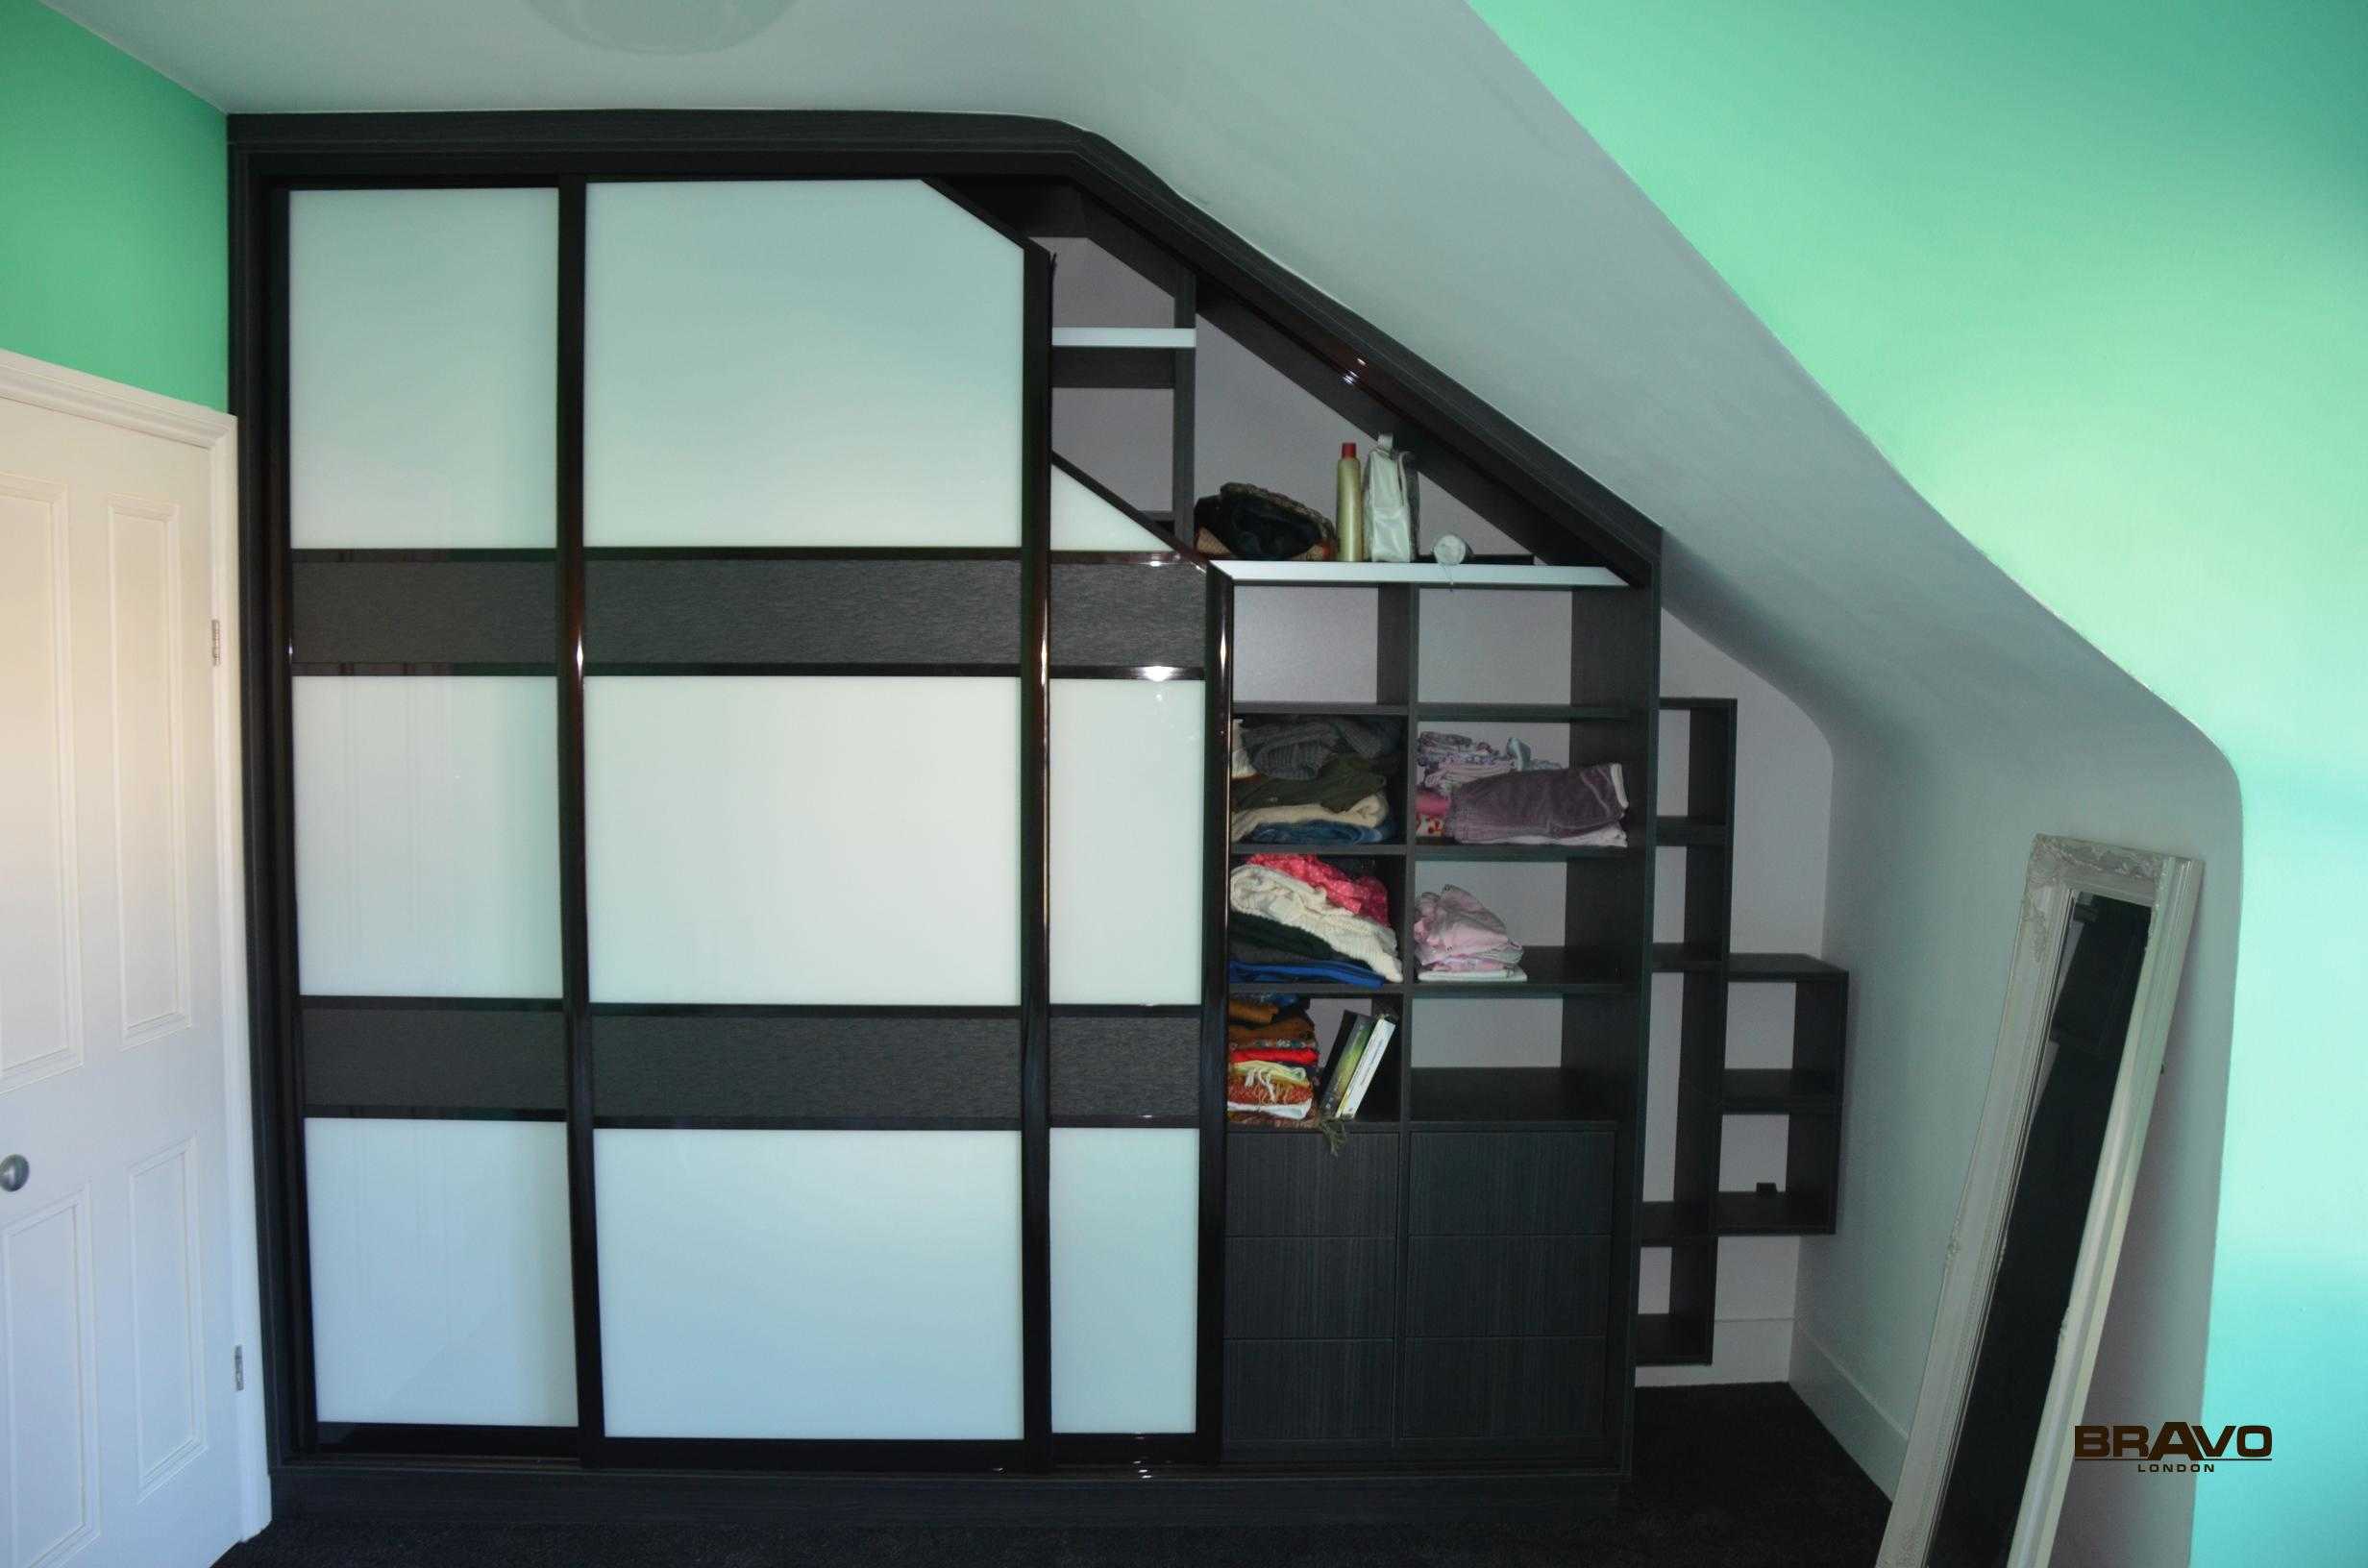 A modern walk-in wardrobe with black frames and frosted glass panels, built under a slanted ceiling in a room with mint-green walls.